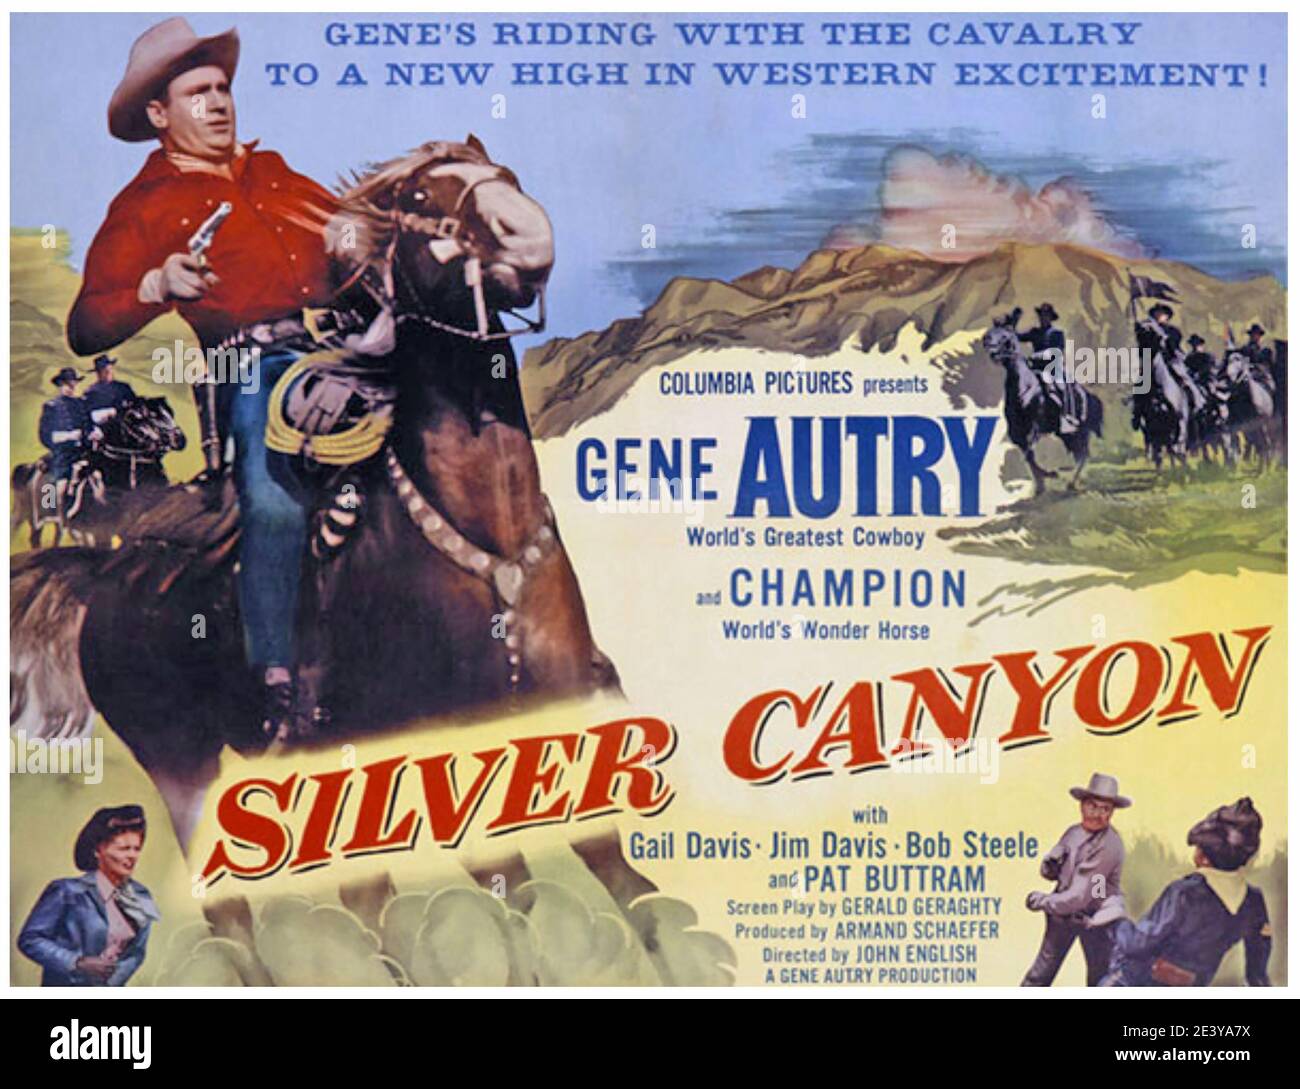 Call of the canyon Gene Autry western movie poster print 